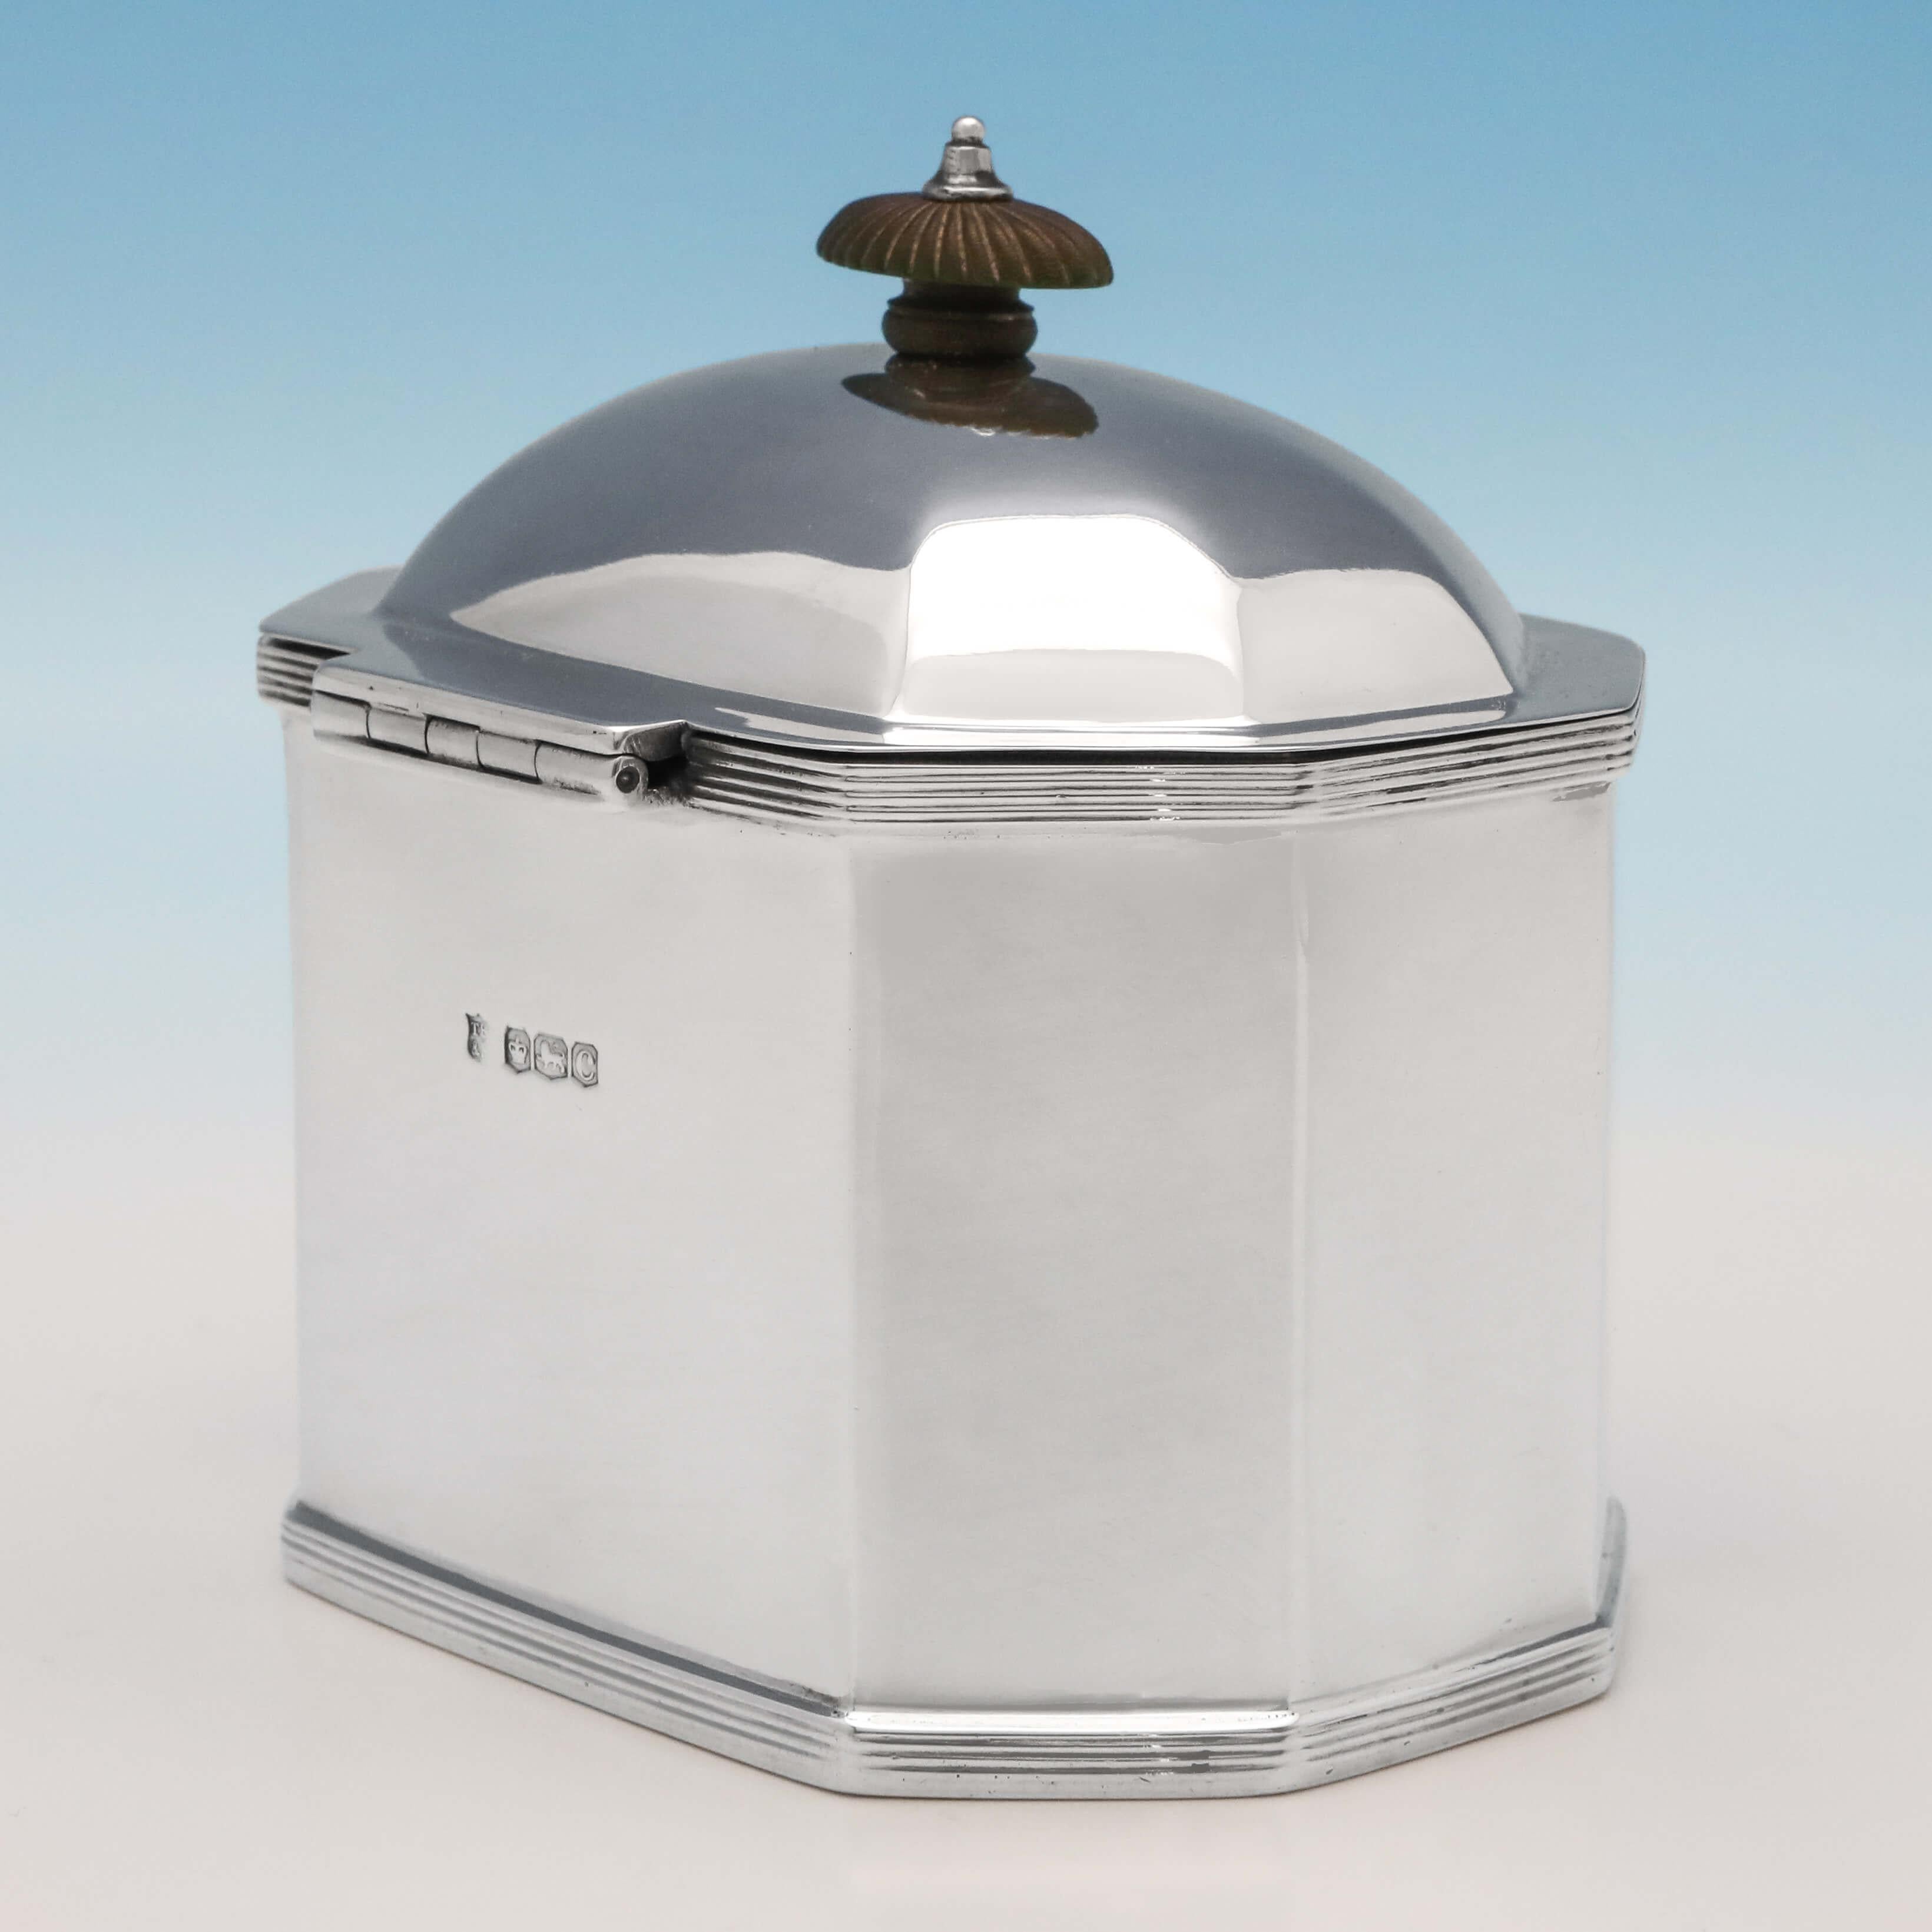 Art Deco Octagonal Antique Sterling Silver Tea Caddy from 1920 by Thomas Bradbury & Sons